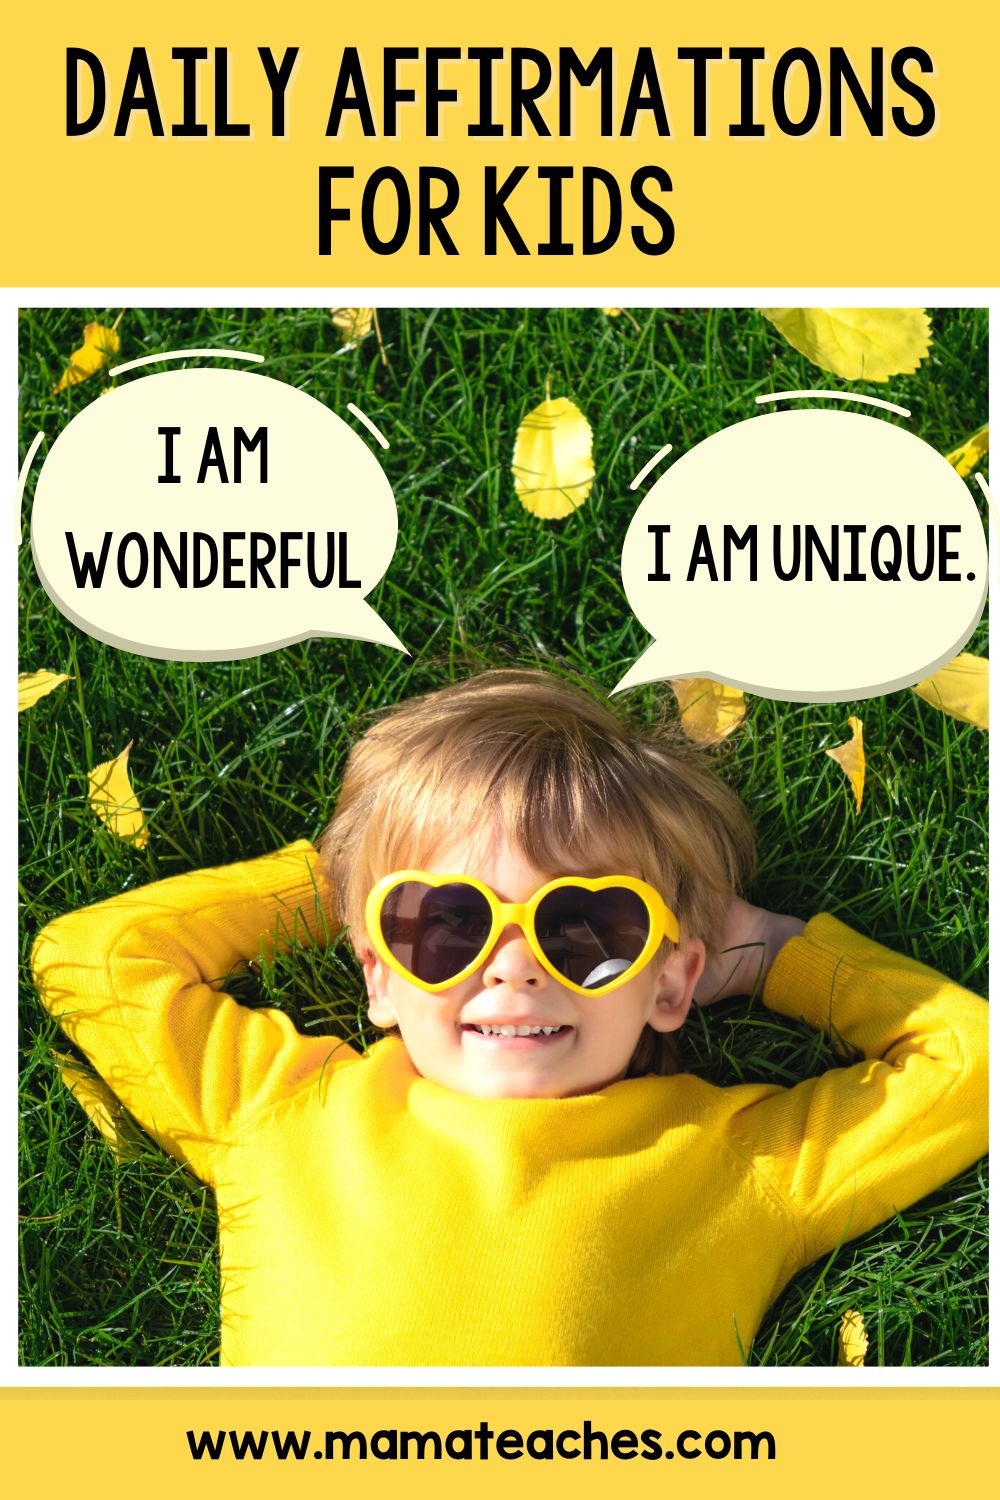 Daily Affirmations for Kids